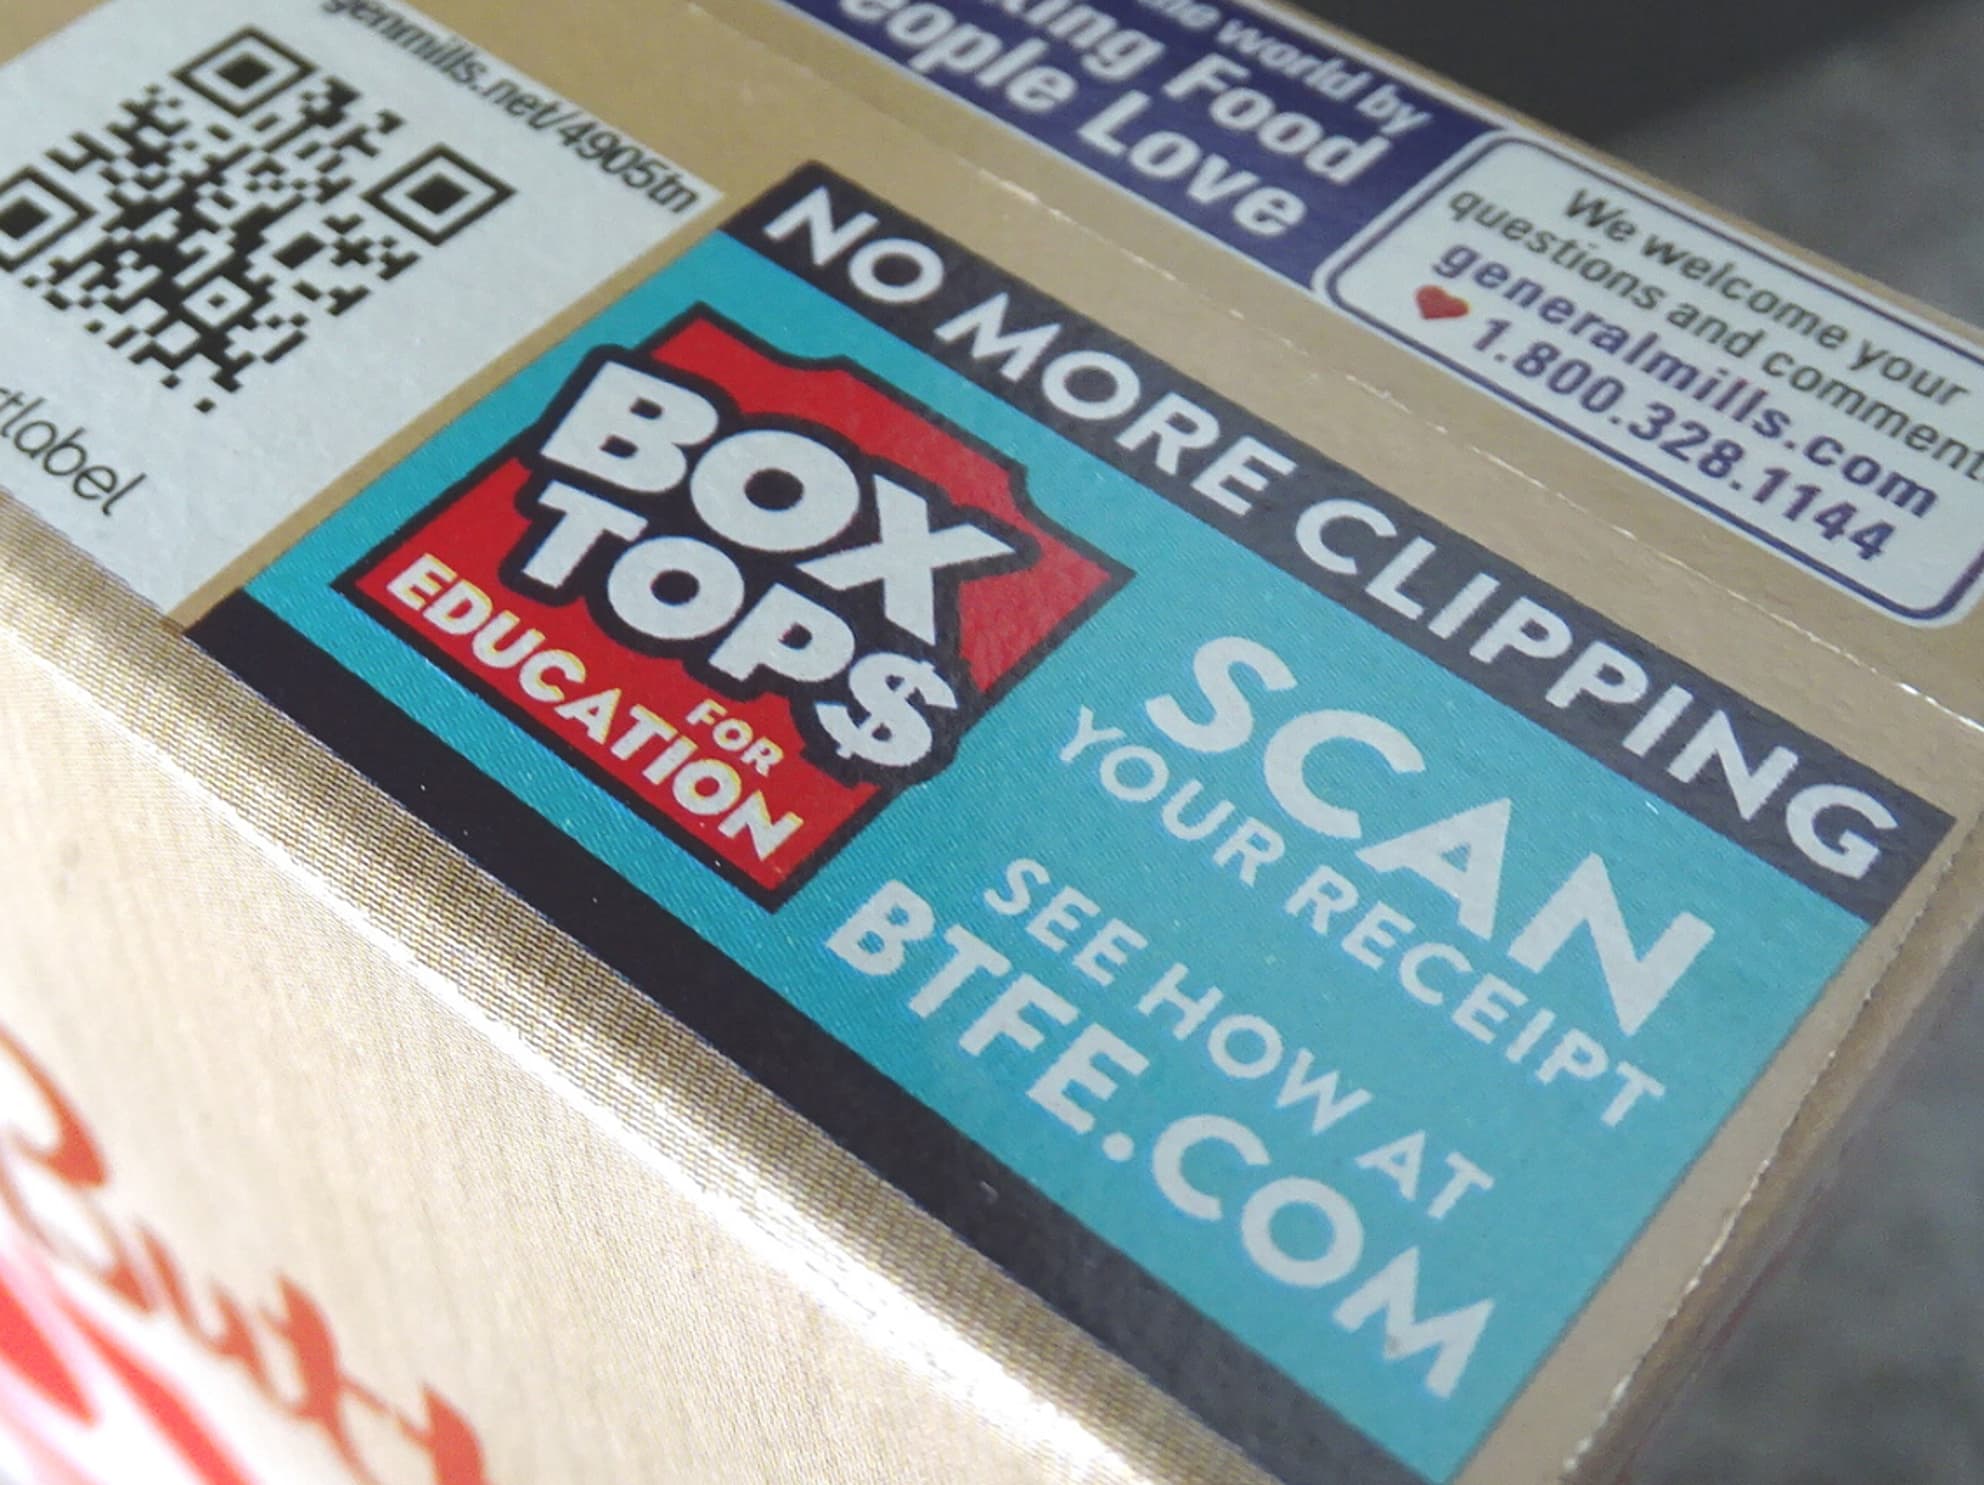 Big change for Box Tops - General Mills